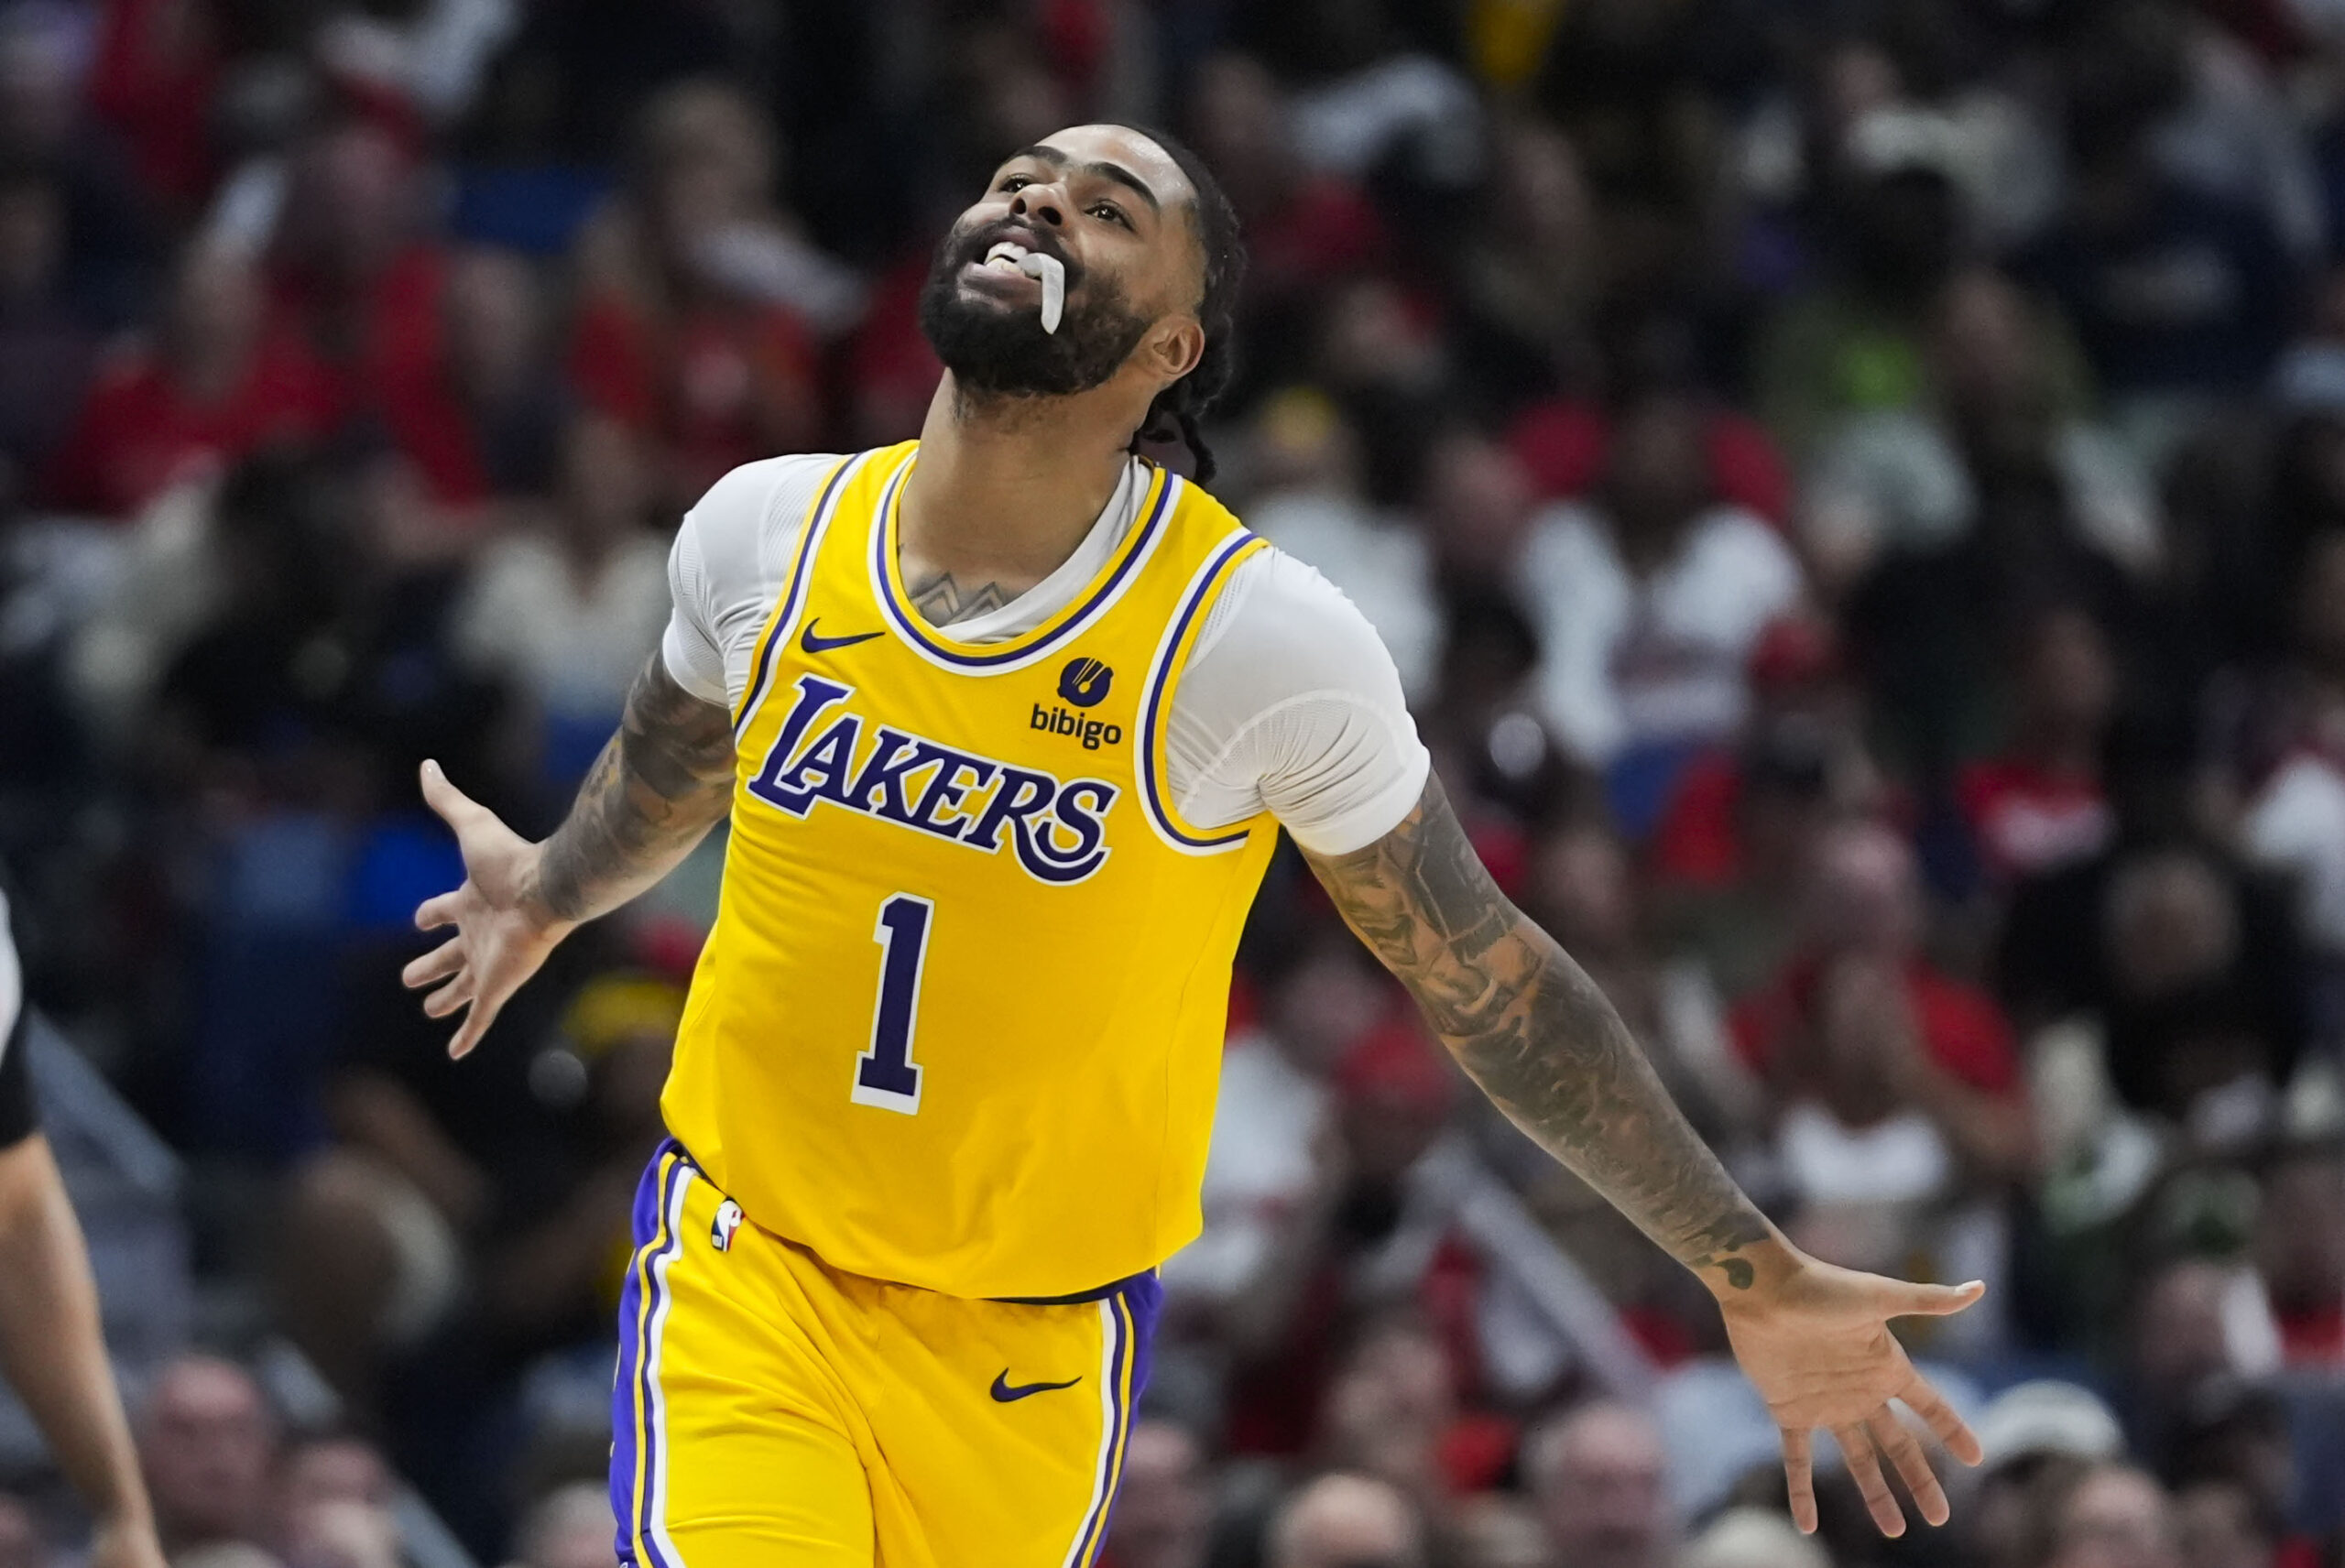 d’angelo russell vital for lakers vs nuggets, says derek fisher